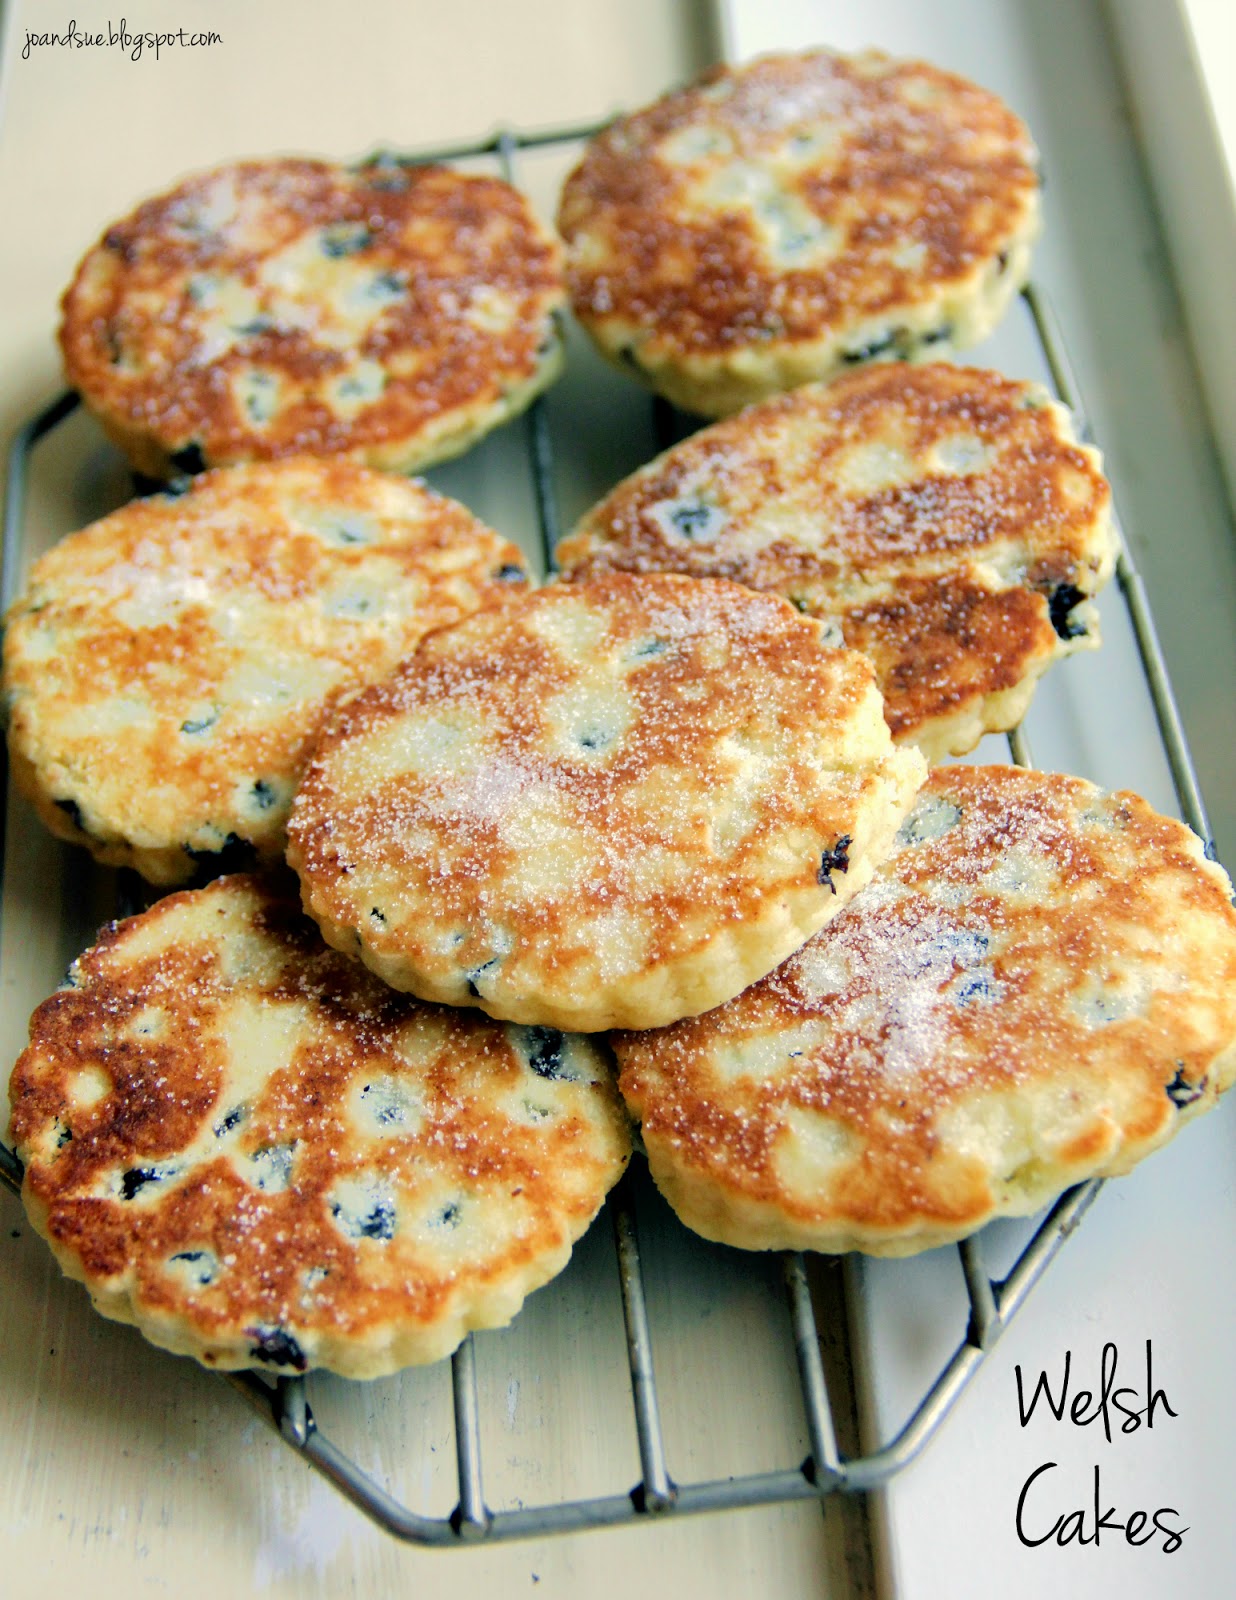 Jo and Sue: Welsh Cakes